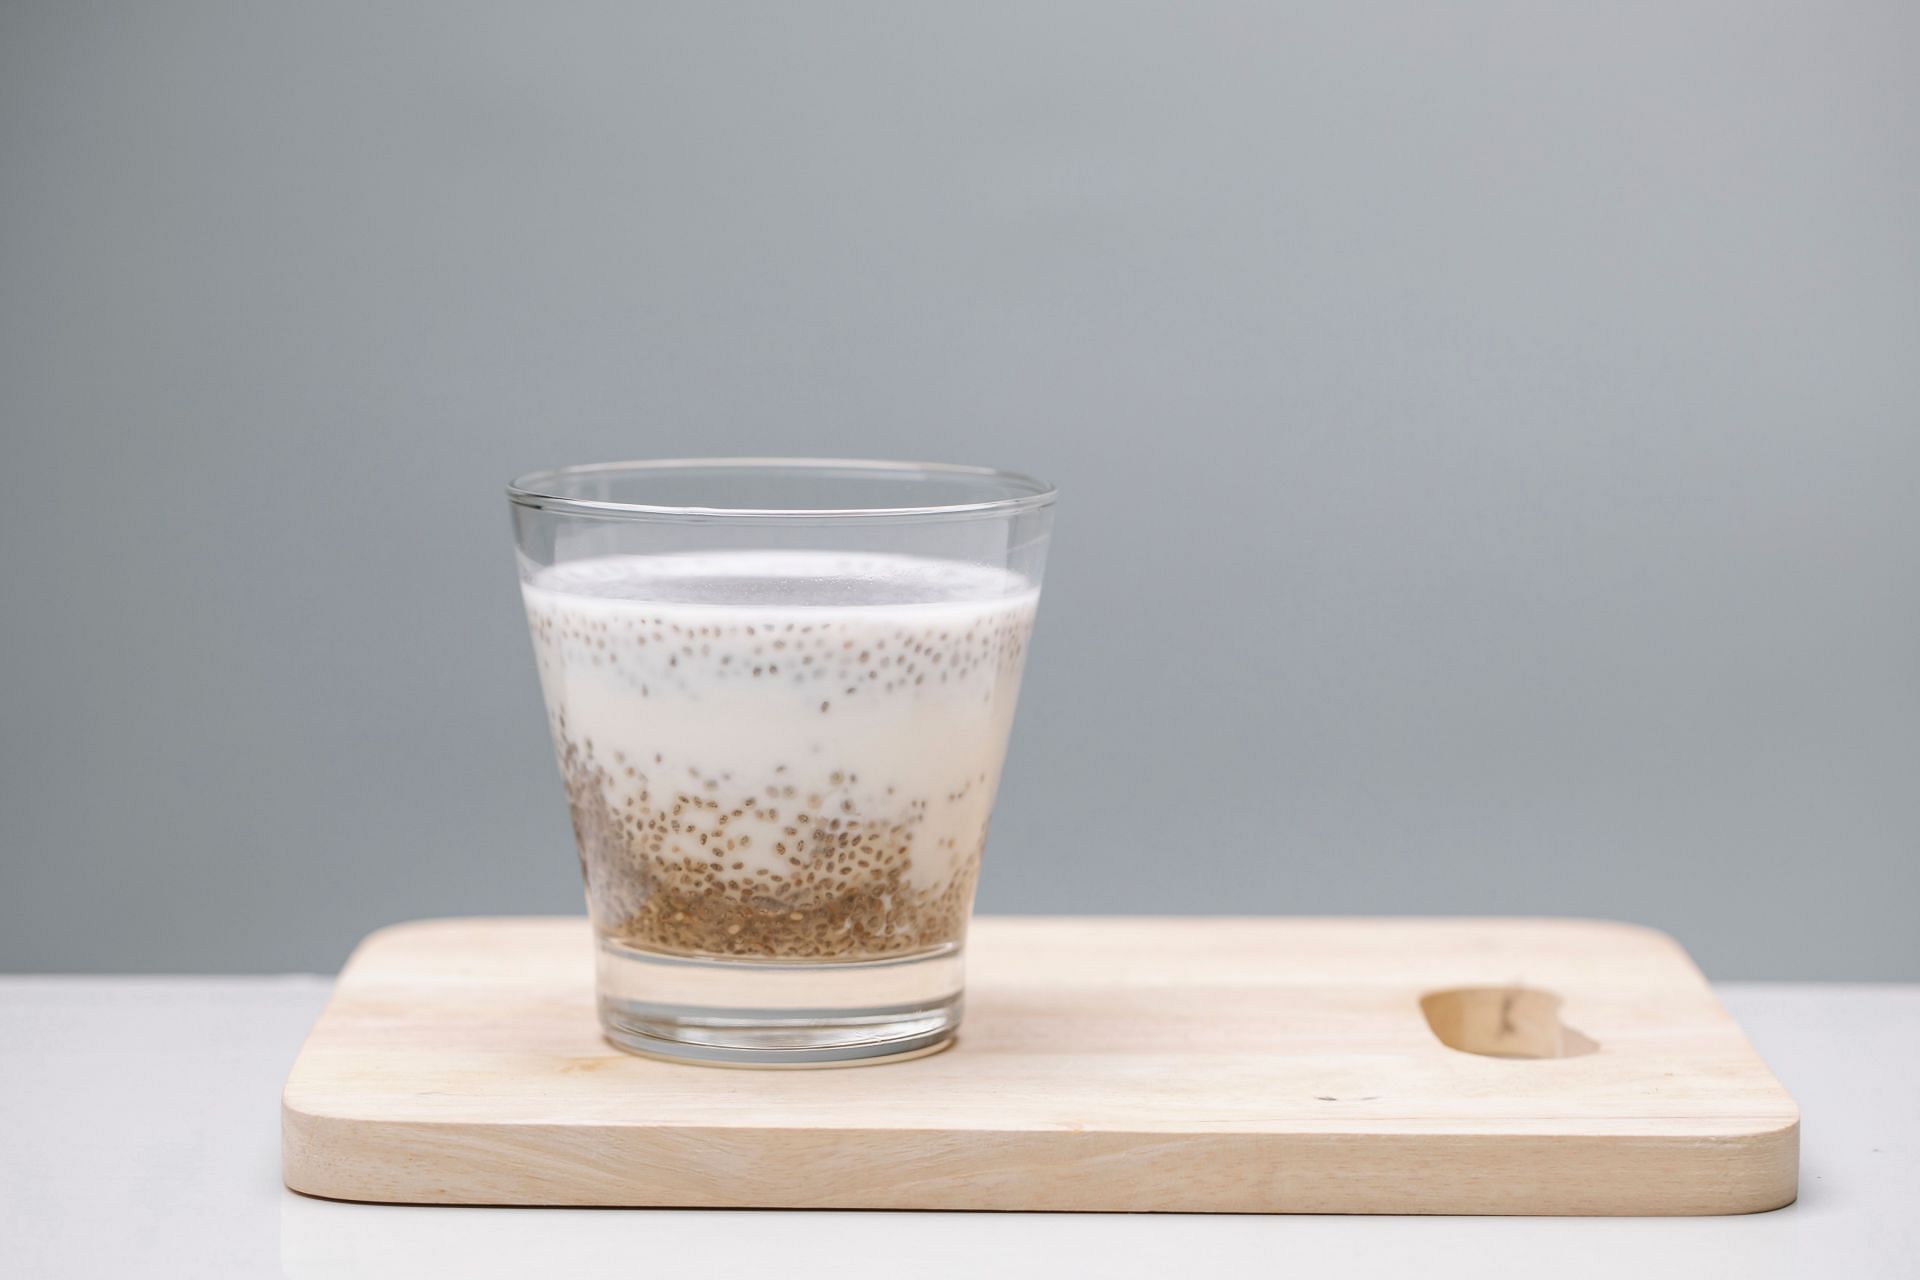 What are the benefits of chia seeds? (Image via Pexels/ Charlotte May)